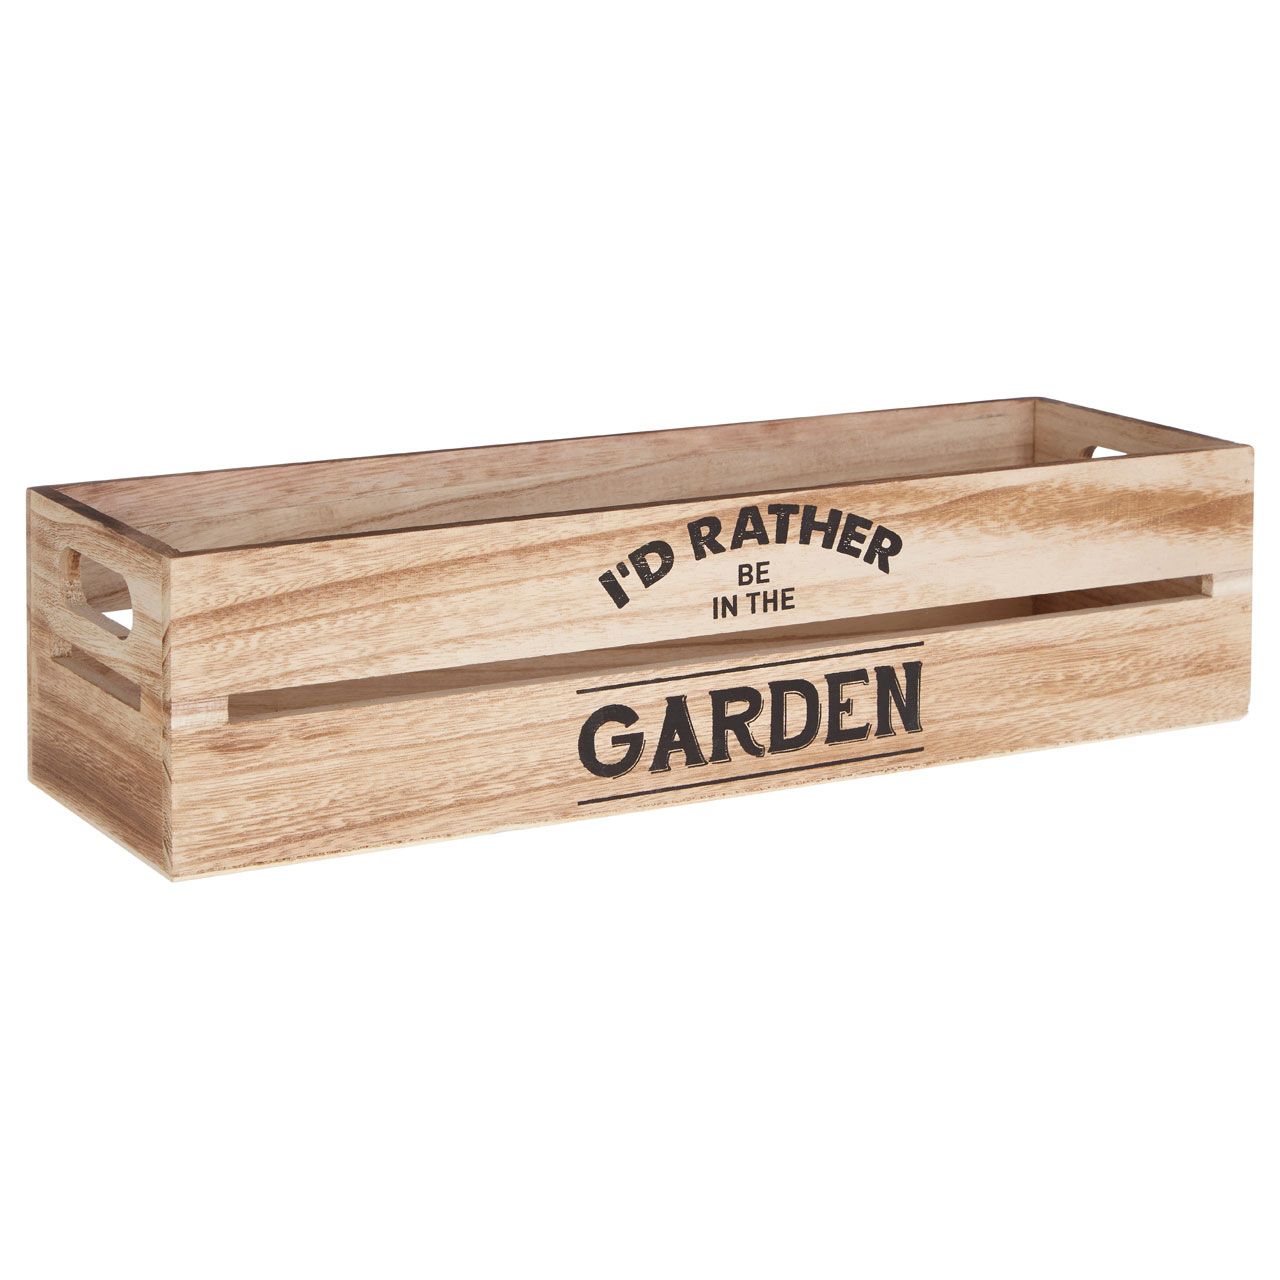 Rustic Wooden Herb Planter